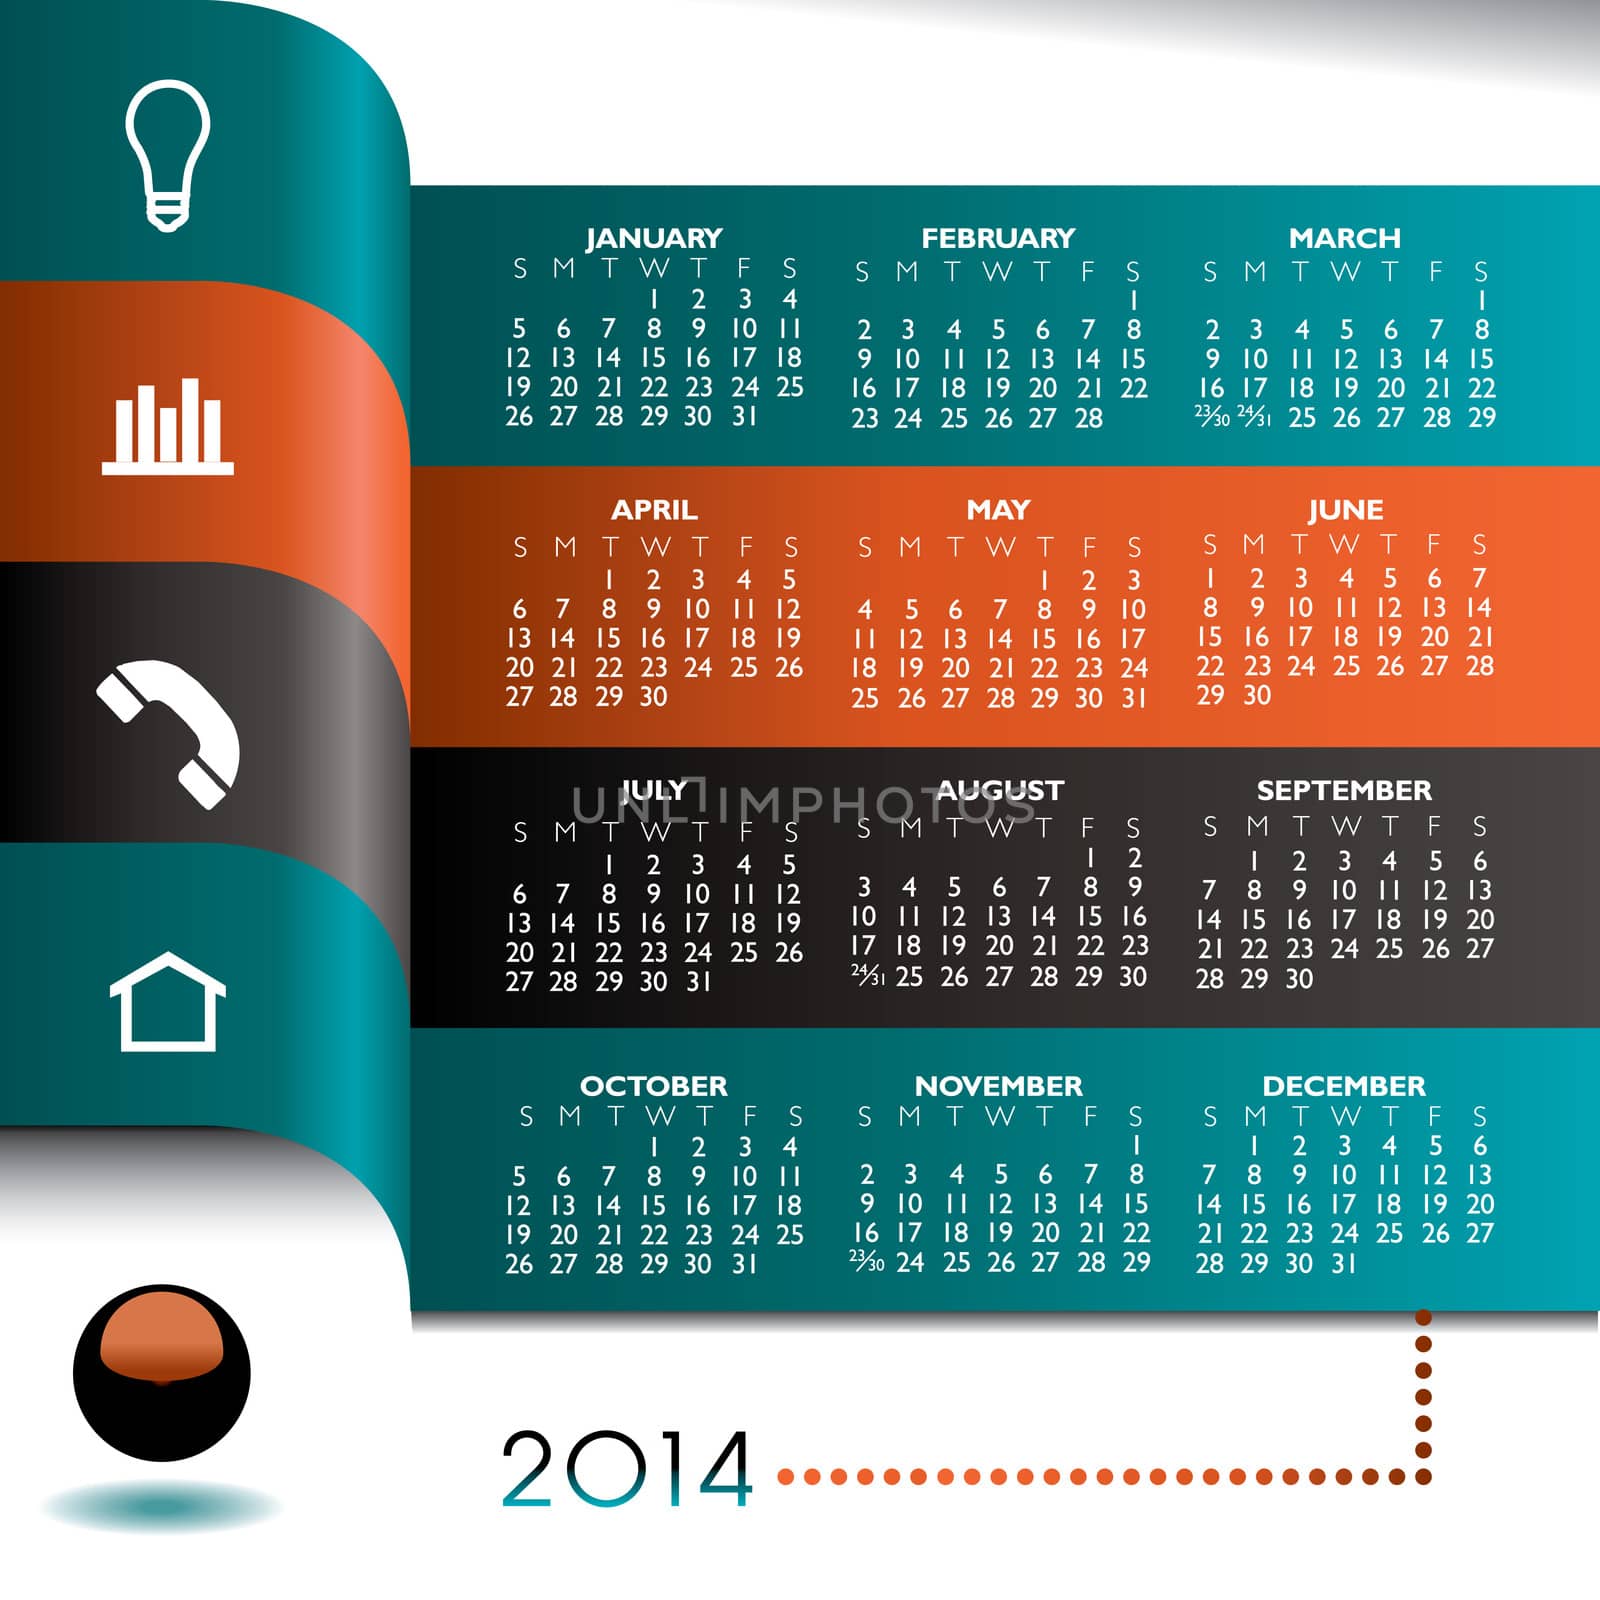 2014 Creative Infographic Calendar by mike301